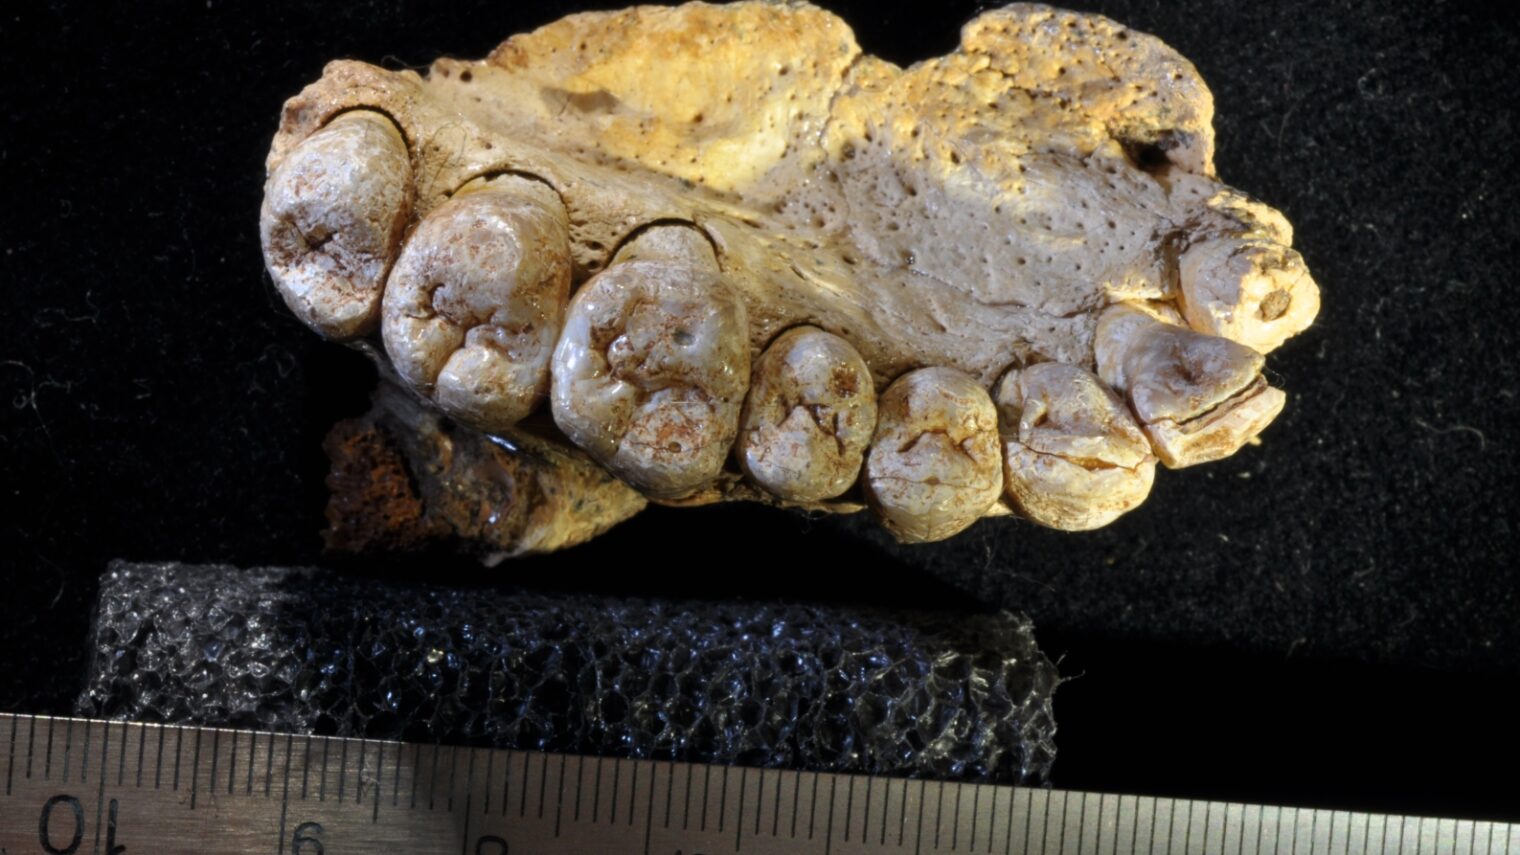 This jawbone found in an Israeli cave has changed anthropologistsâ€™ understanding of the migration of modern humans out of Africa. Photo courtesy of Tel Aviv University